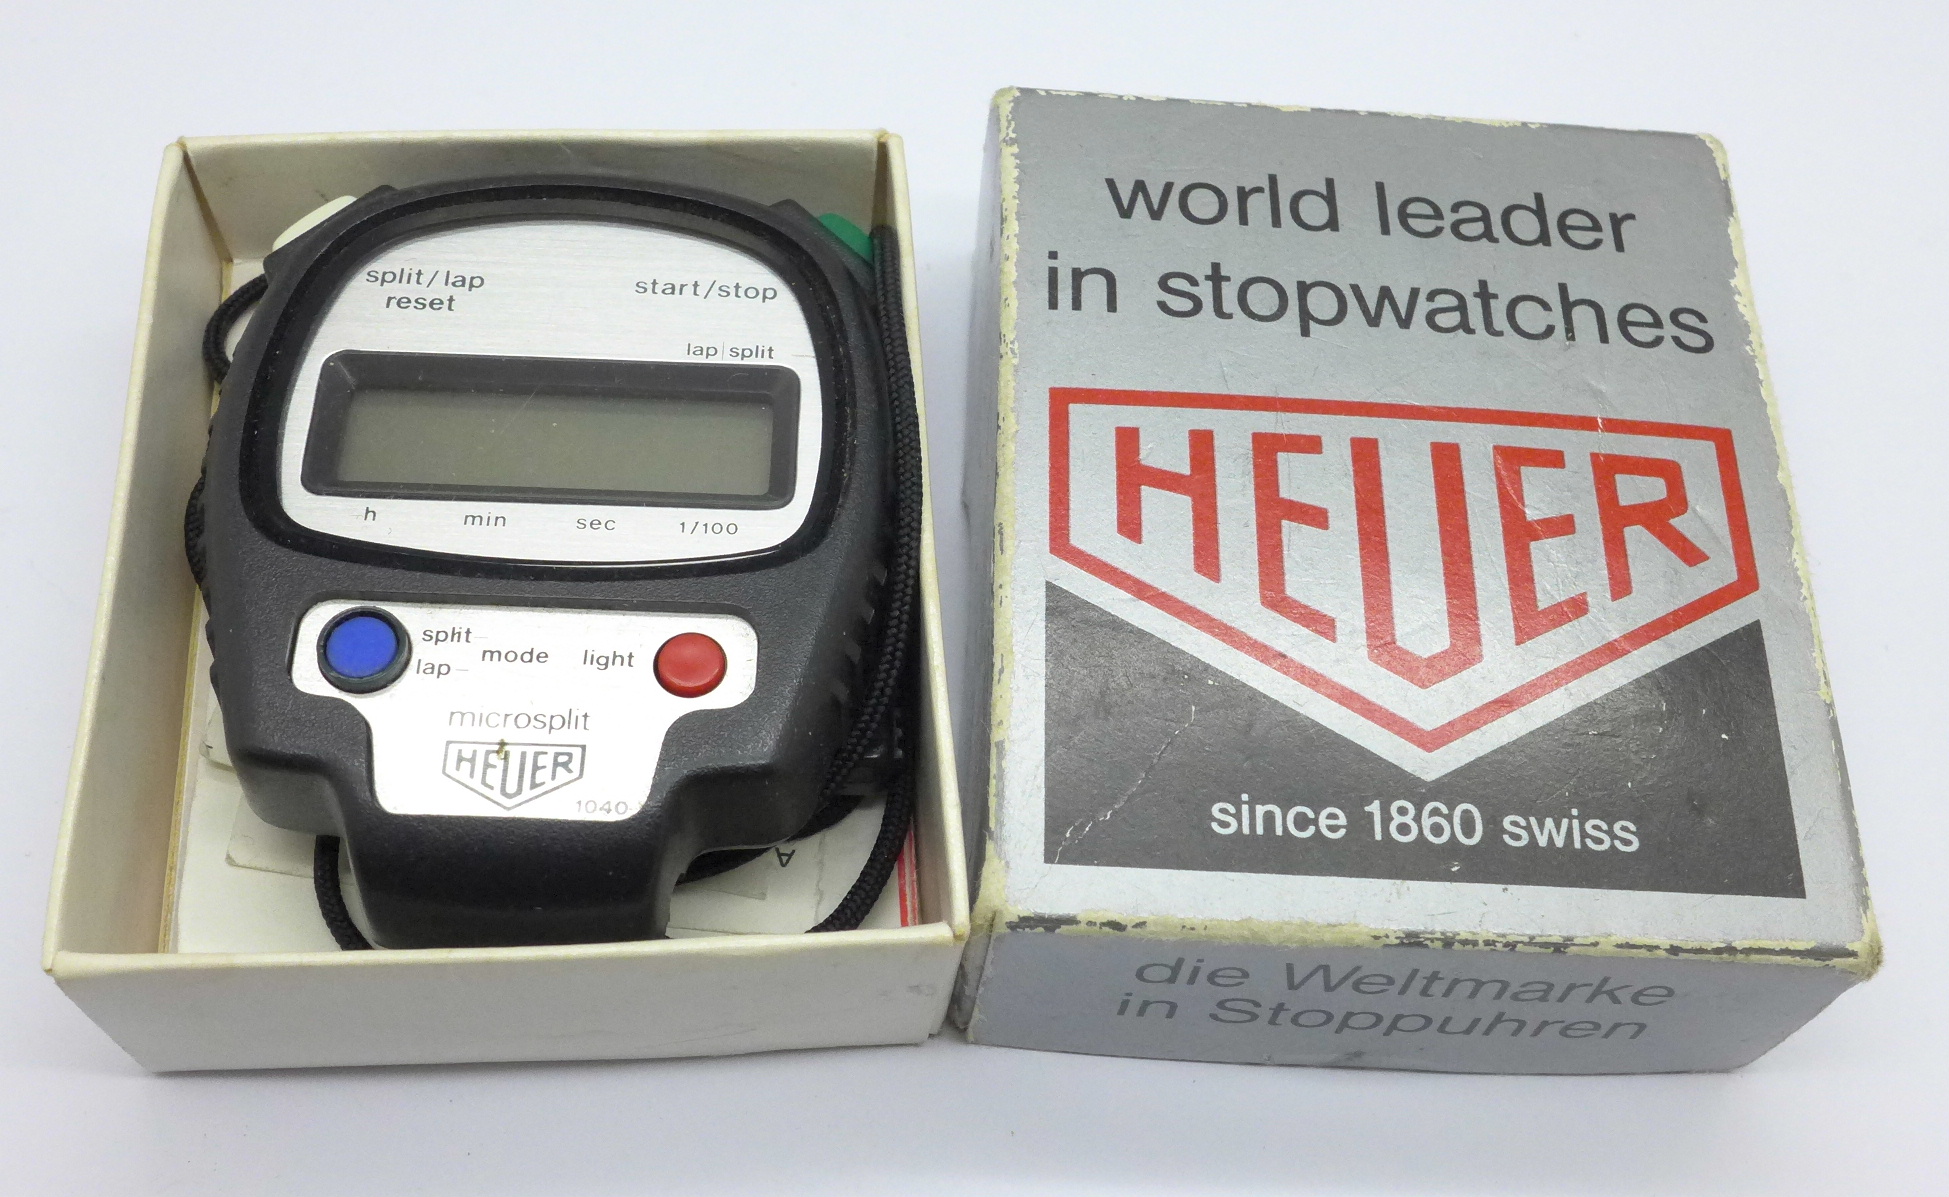 A Heuer stopwatch, model 1040, with box